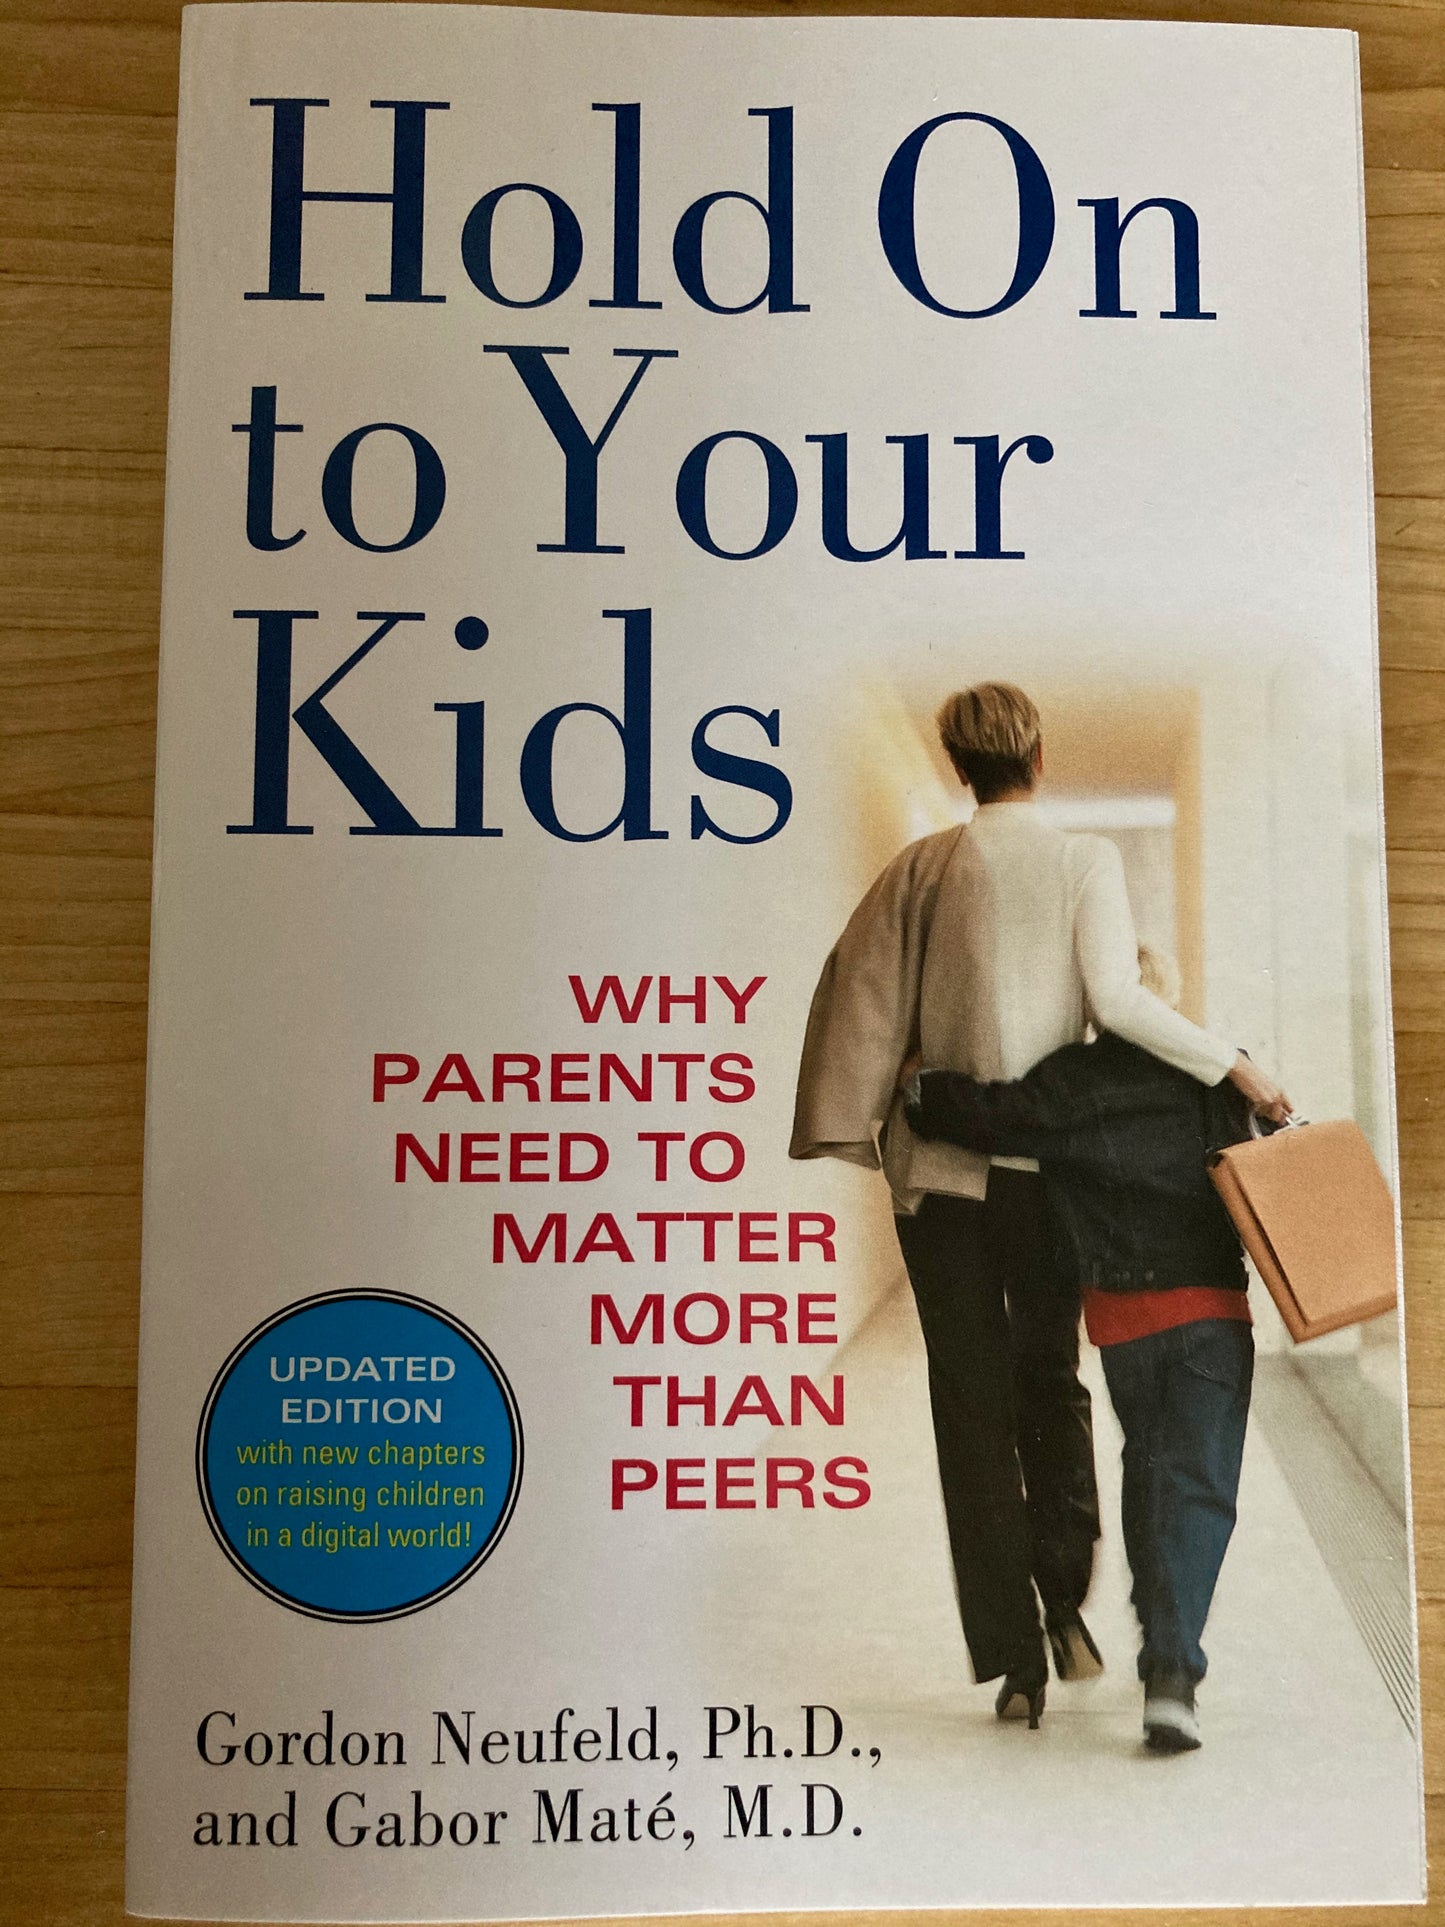 Parenting Resource Book - HOLD ON TO YOUR KIDS